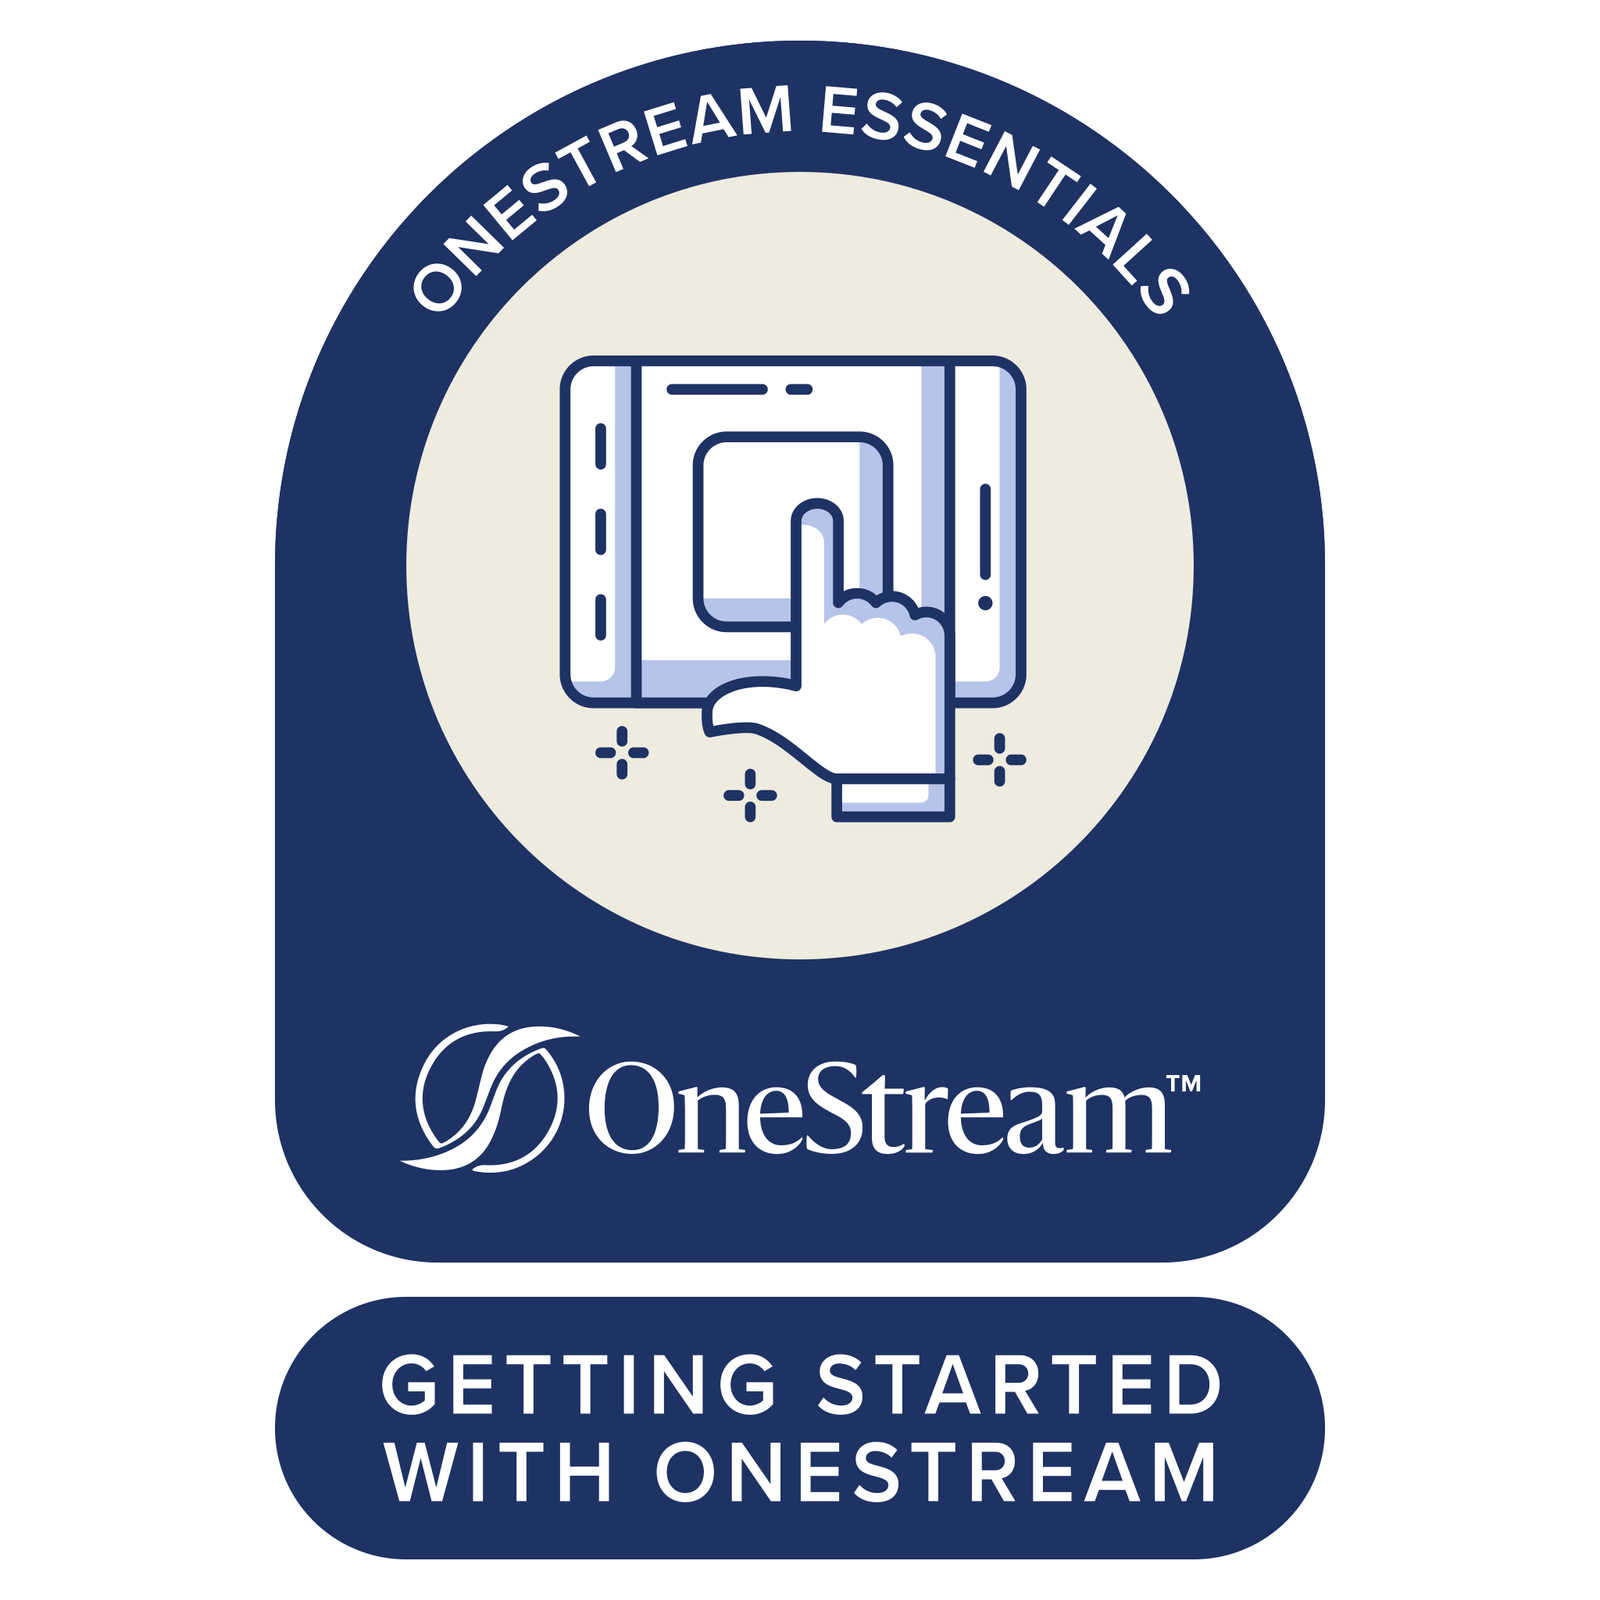 OneStream Essentials: Getting Started With OneStream Course